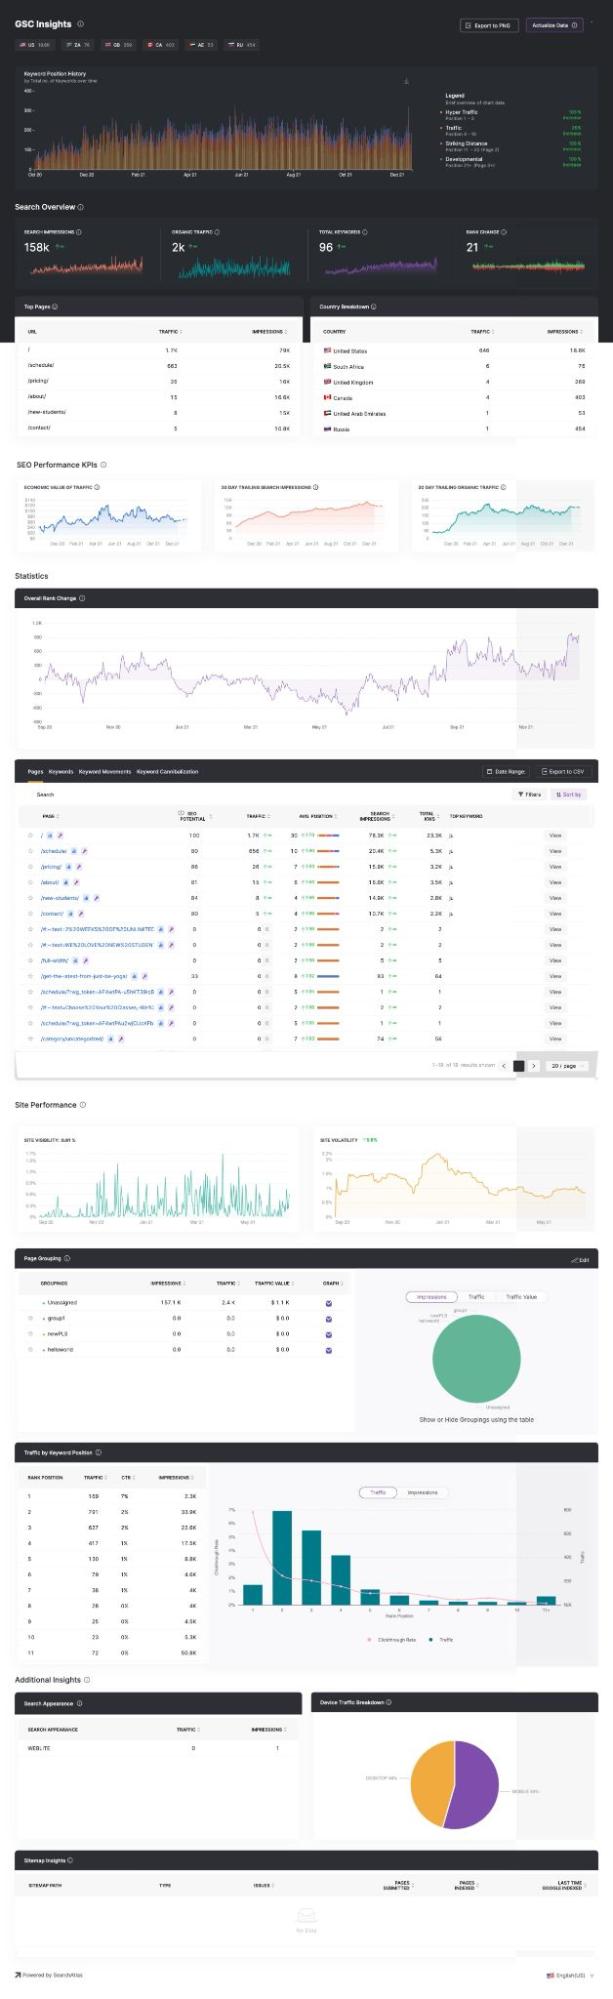 Full SEO report from Search Atlas